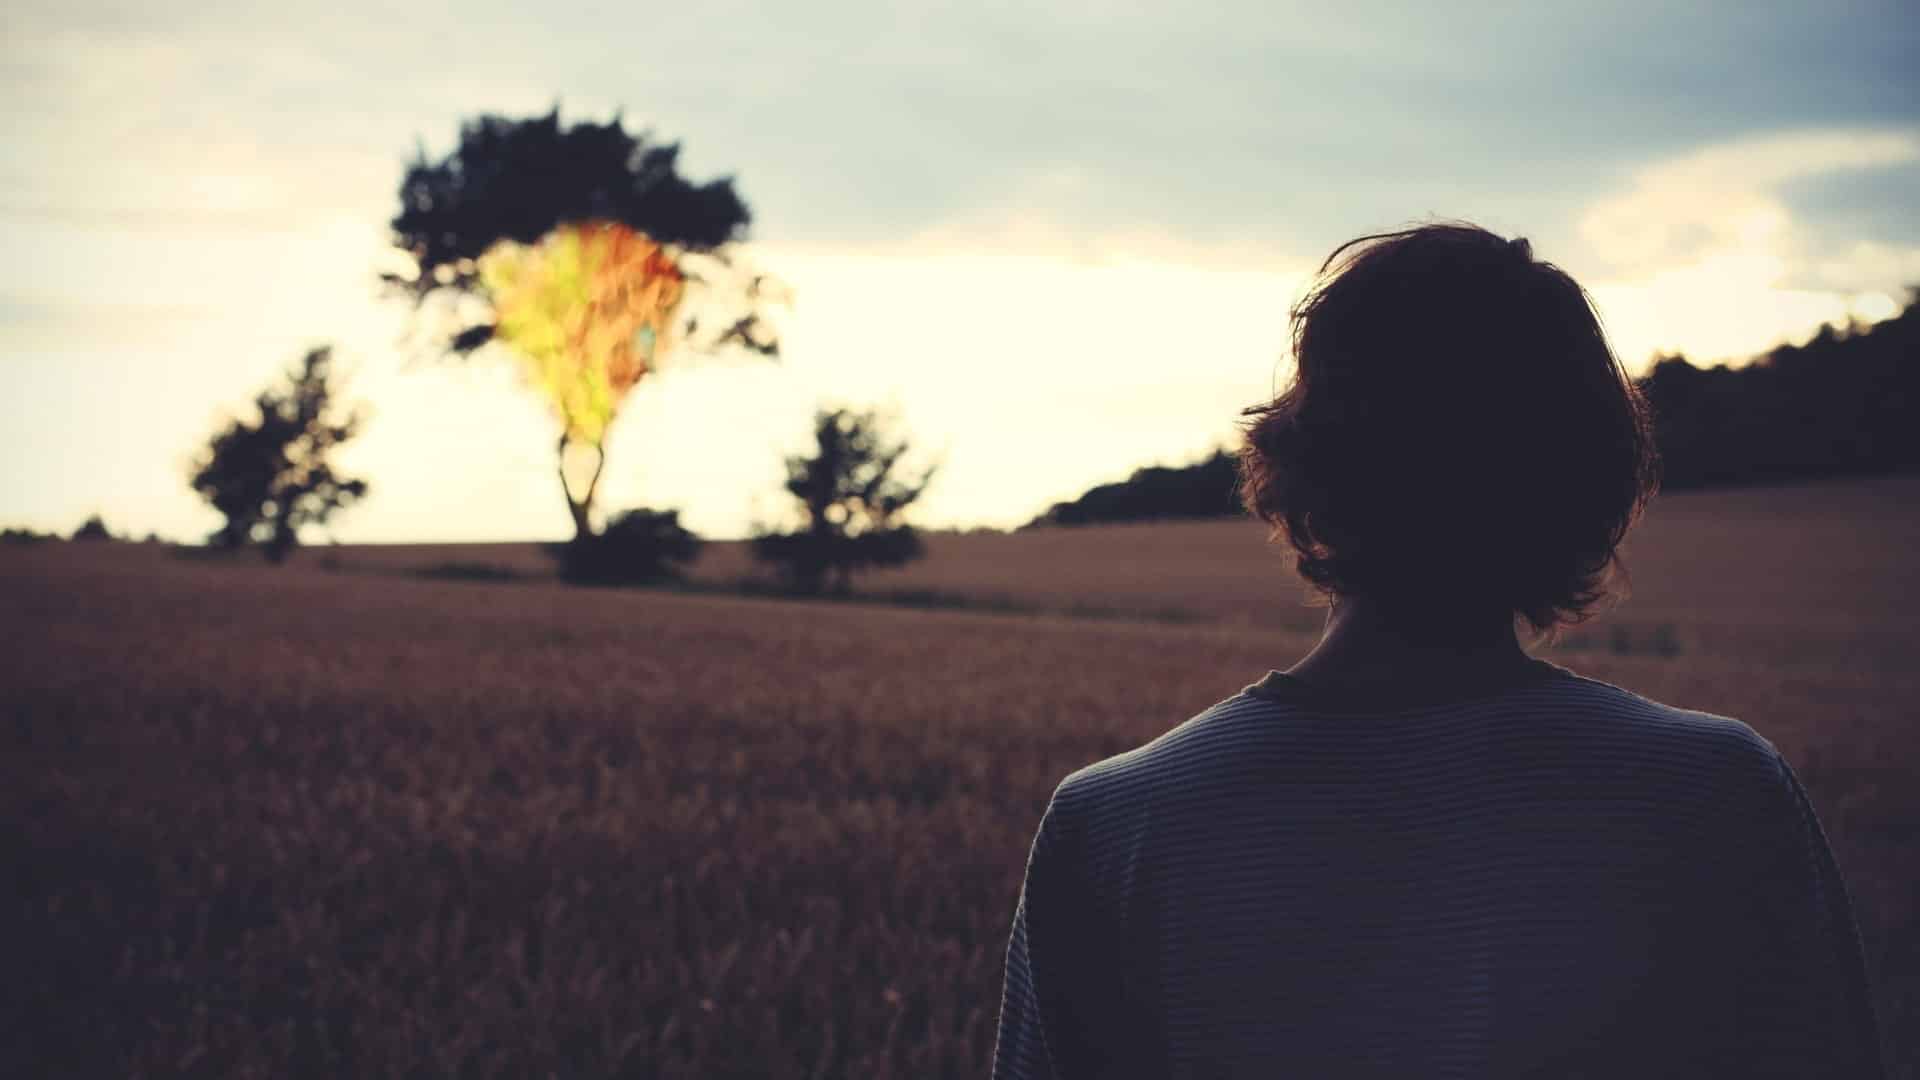 Woman looking at a tree that is on fire